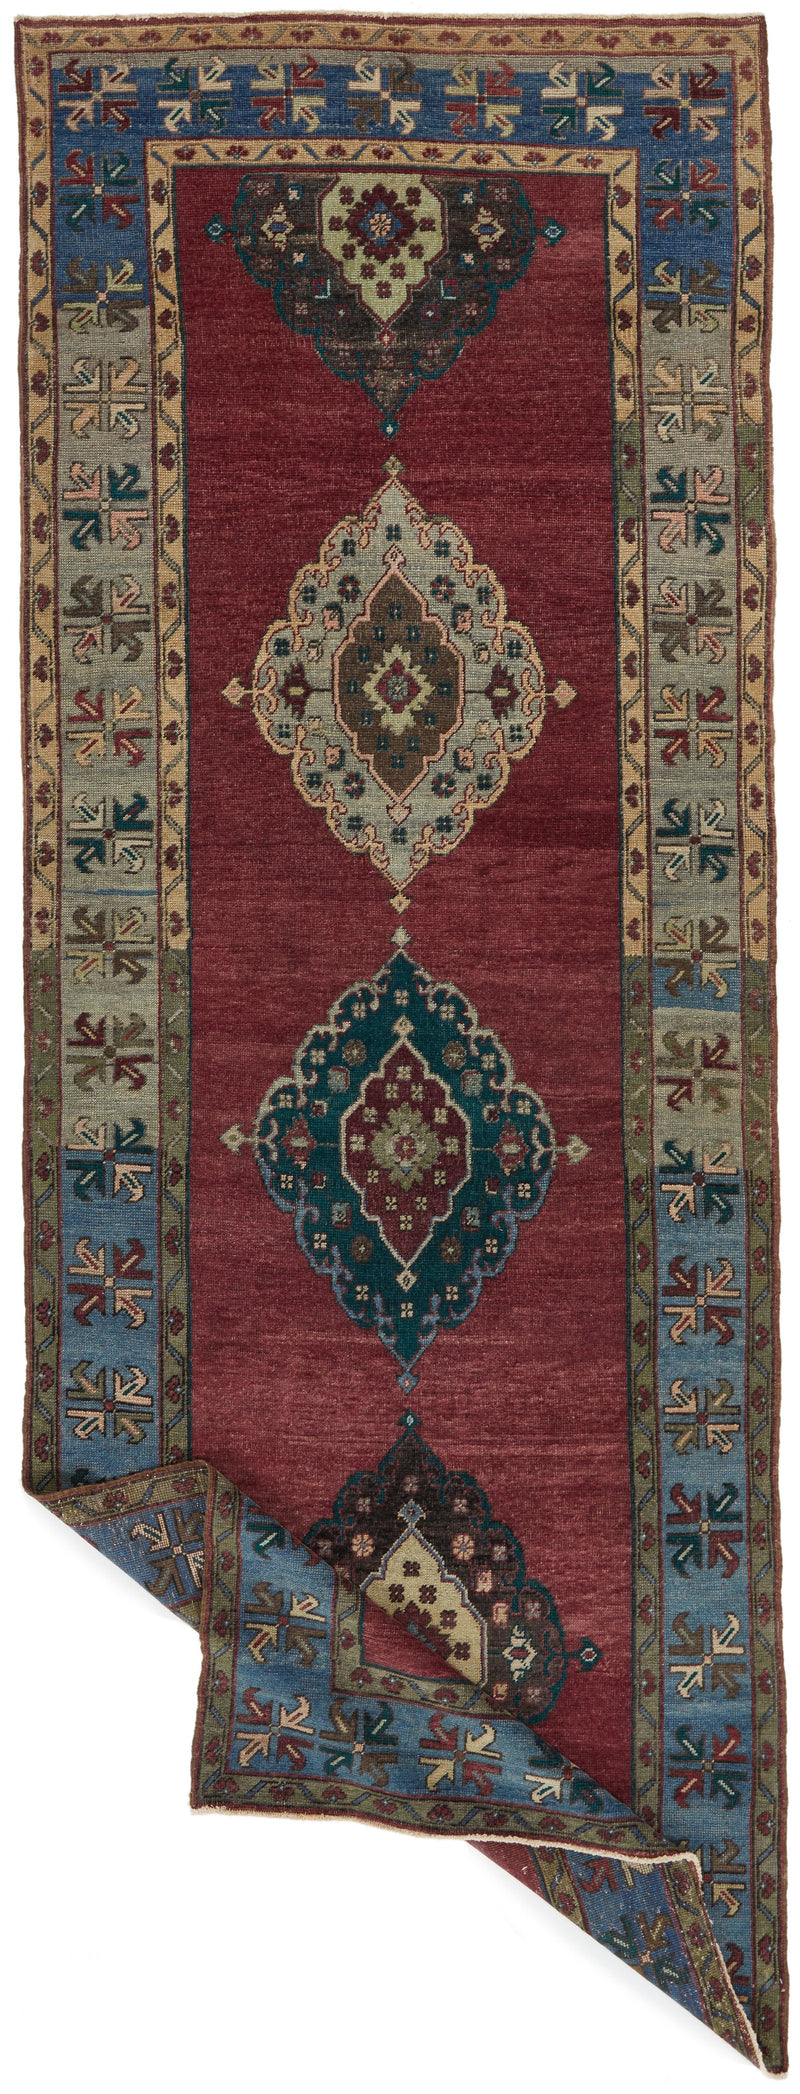 5x13 Red and Blue Turkish Tribal Runner